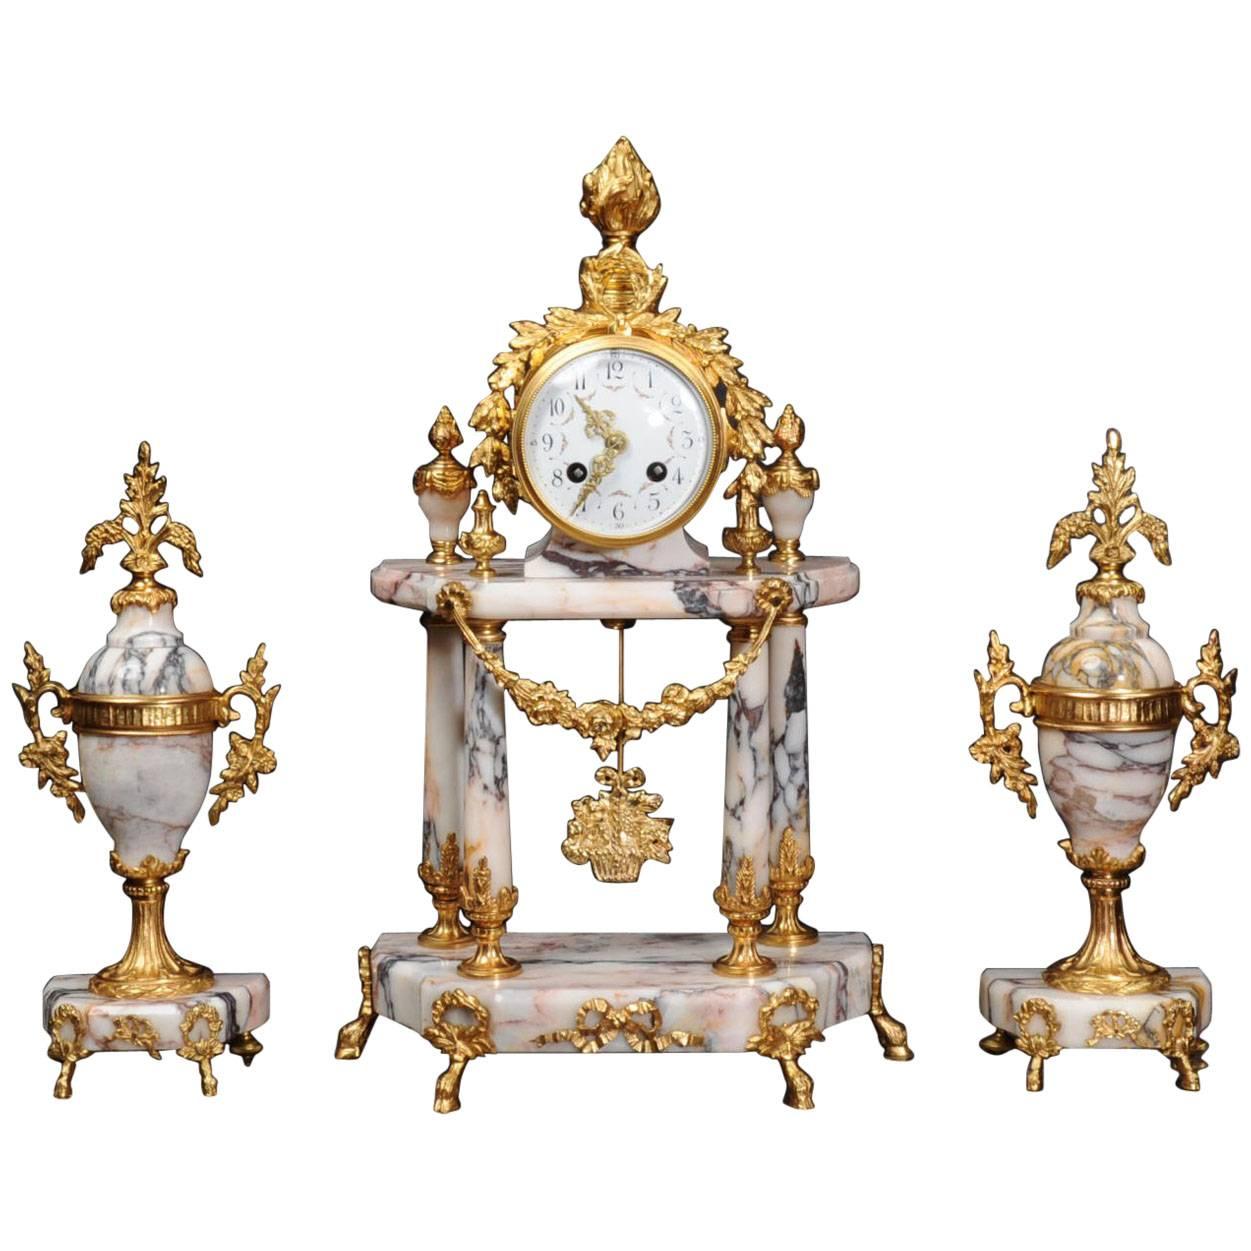 Stunning Marble and Ormolu Portico Clock Set by Samuel Marti